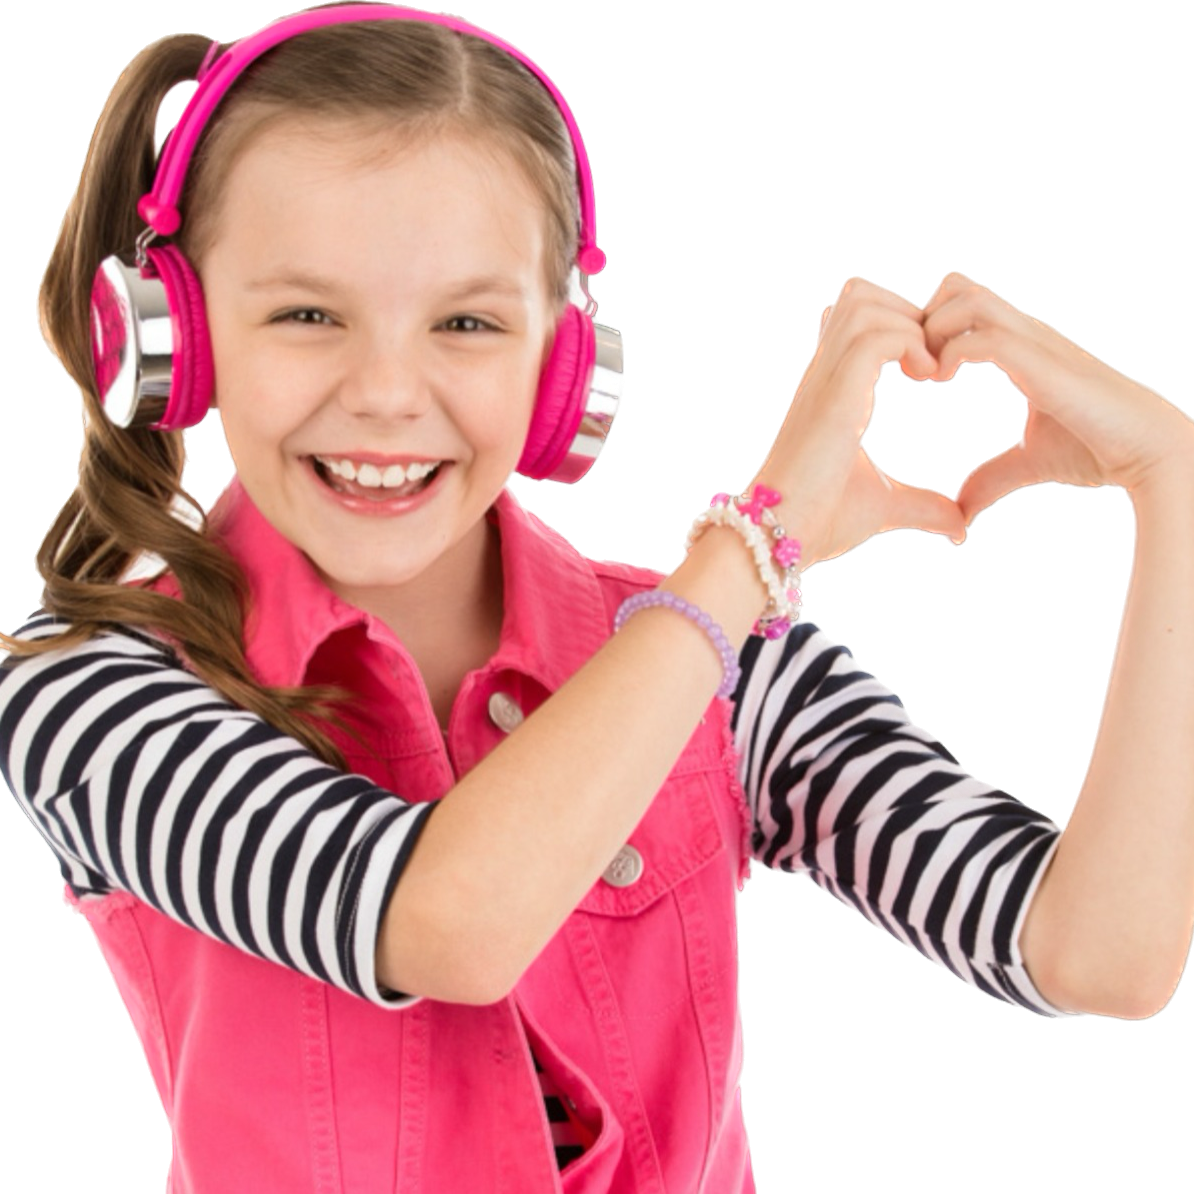 Lilelina voice acting jobs for kids